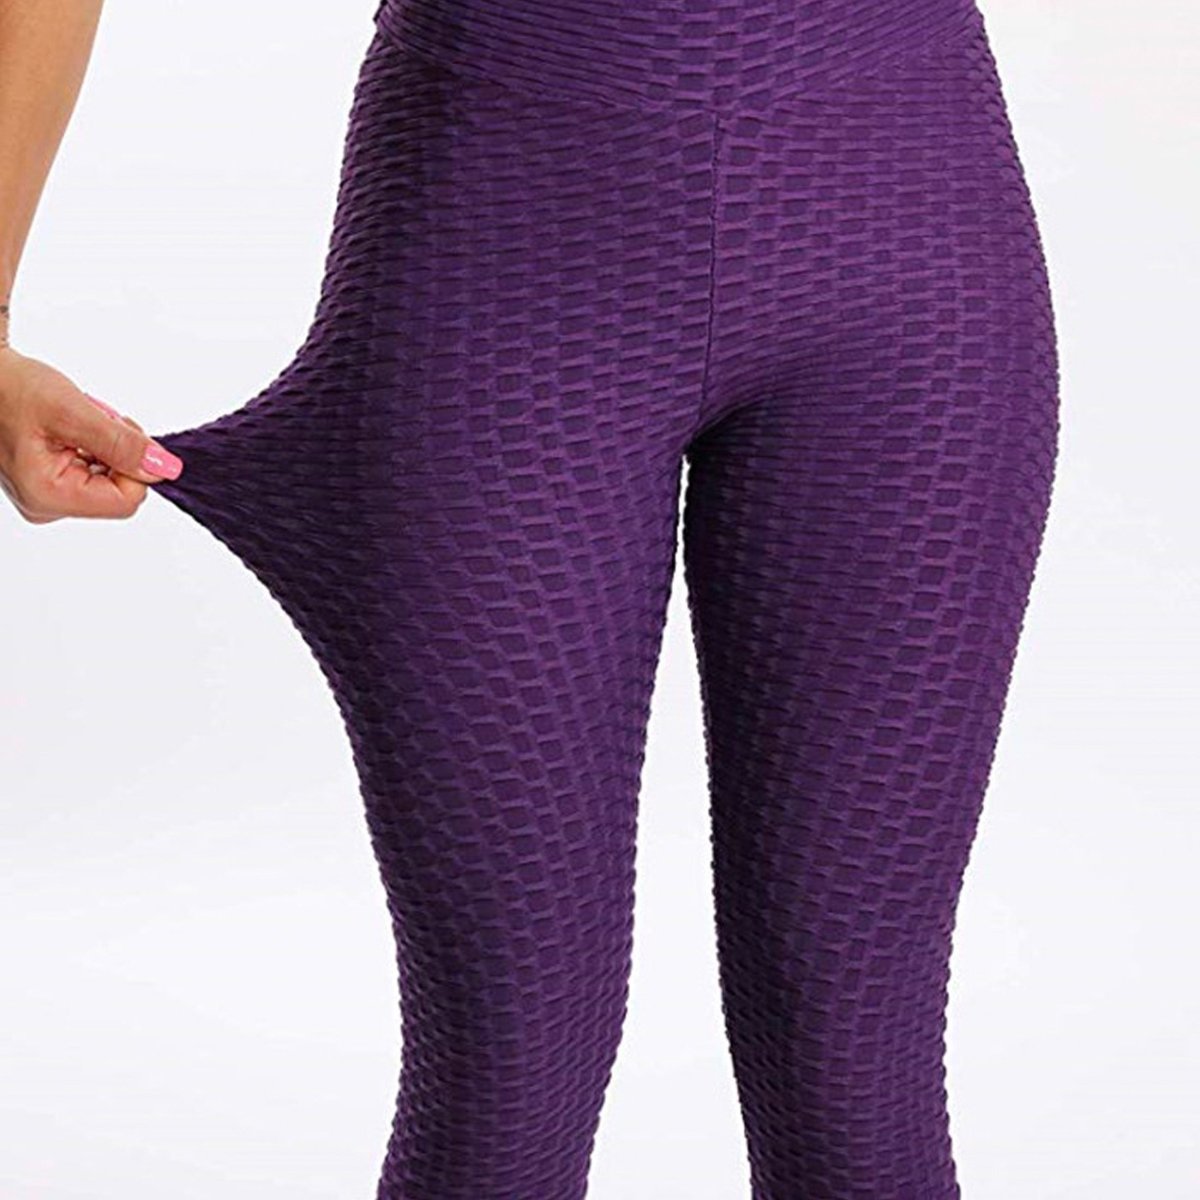 Everie Sculpting Leggings help smooth and reduce the appearance of